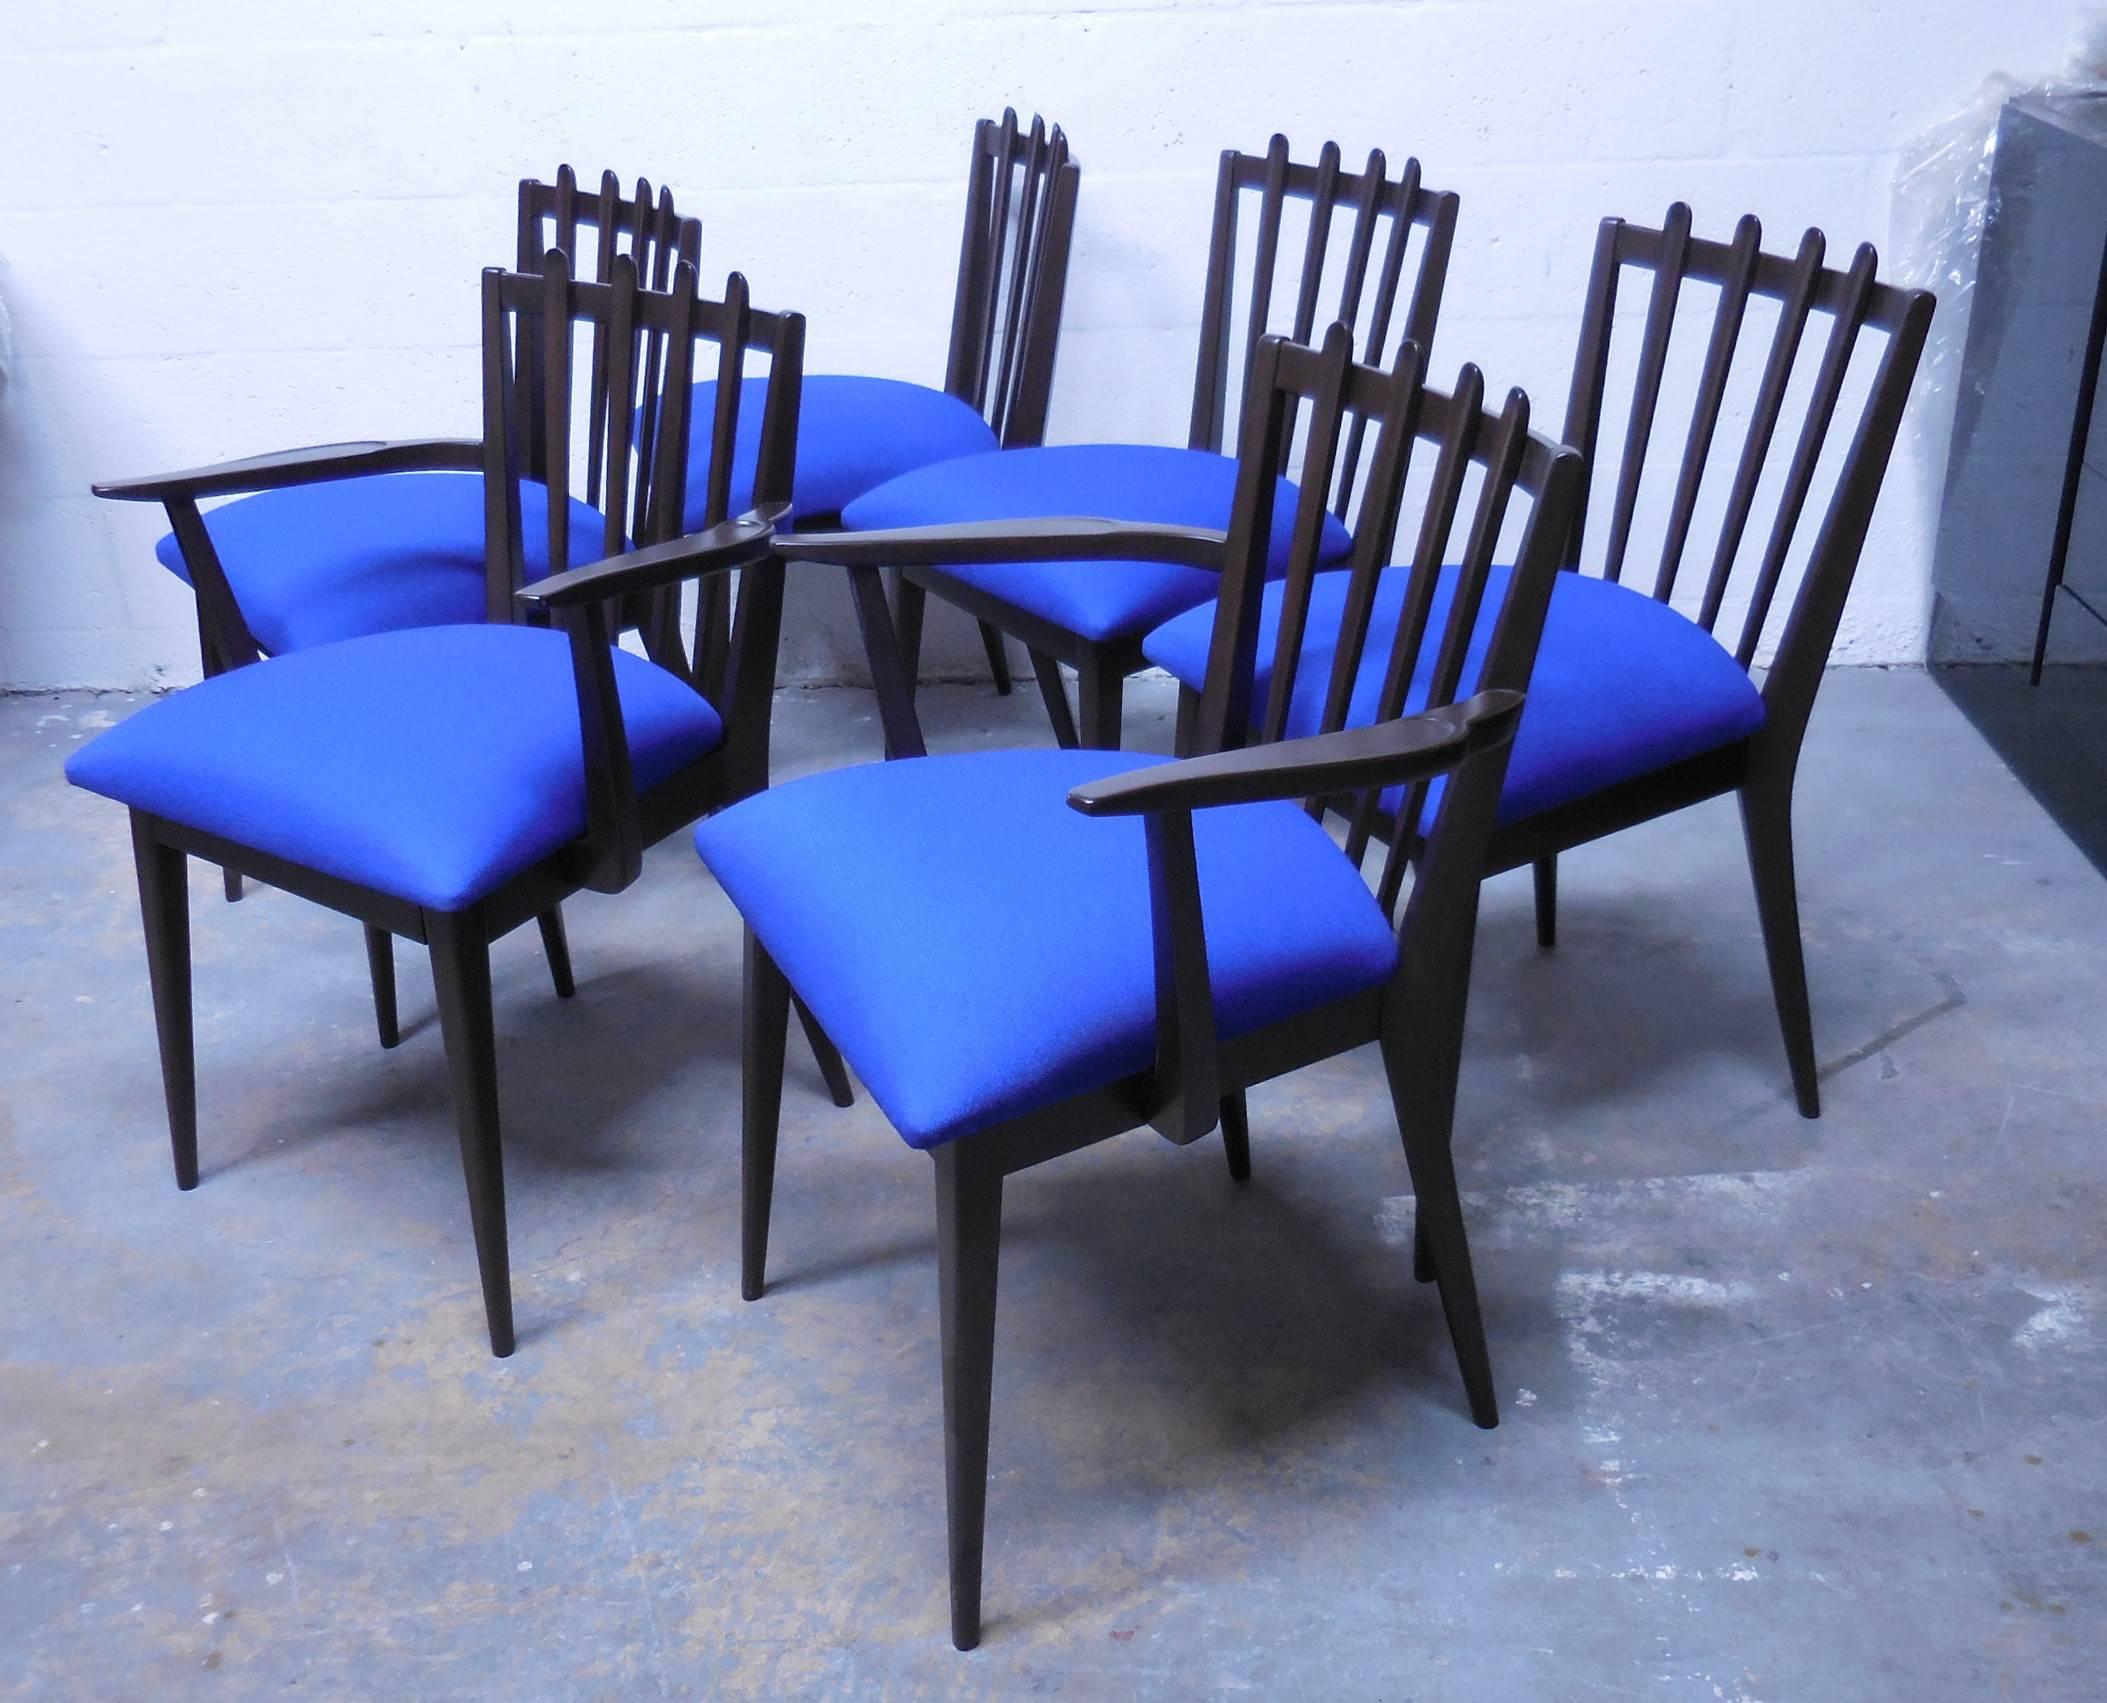 Set of six midcentury dining chairs. Wood frames with upholstered seats. The arms and slats on the backs are subtly carved. Side chairs are 32